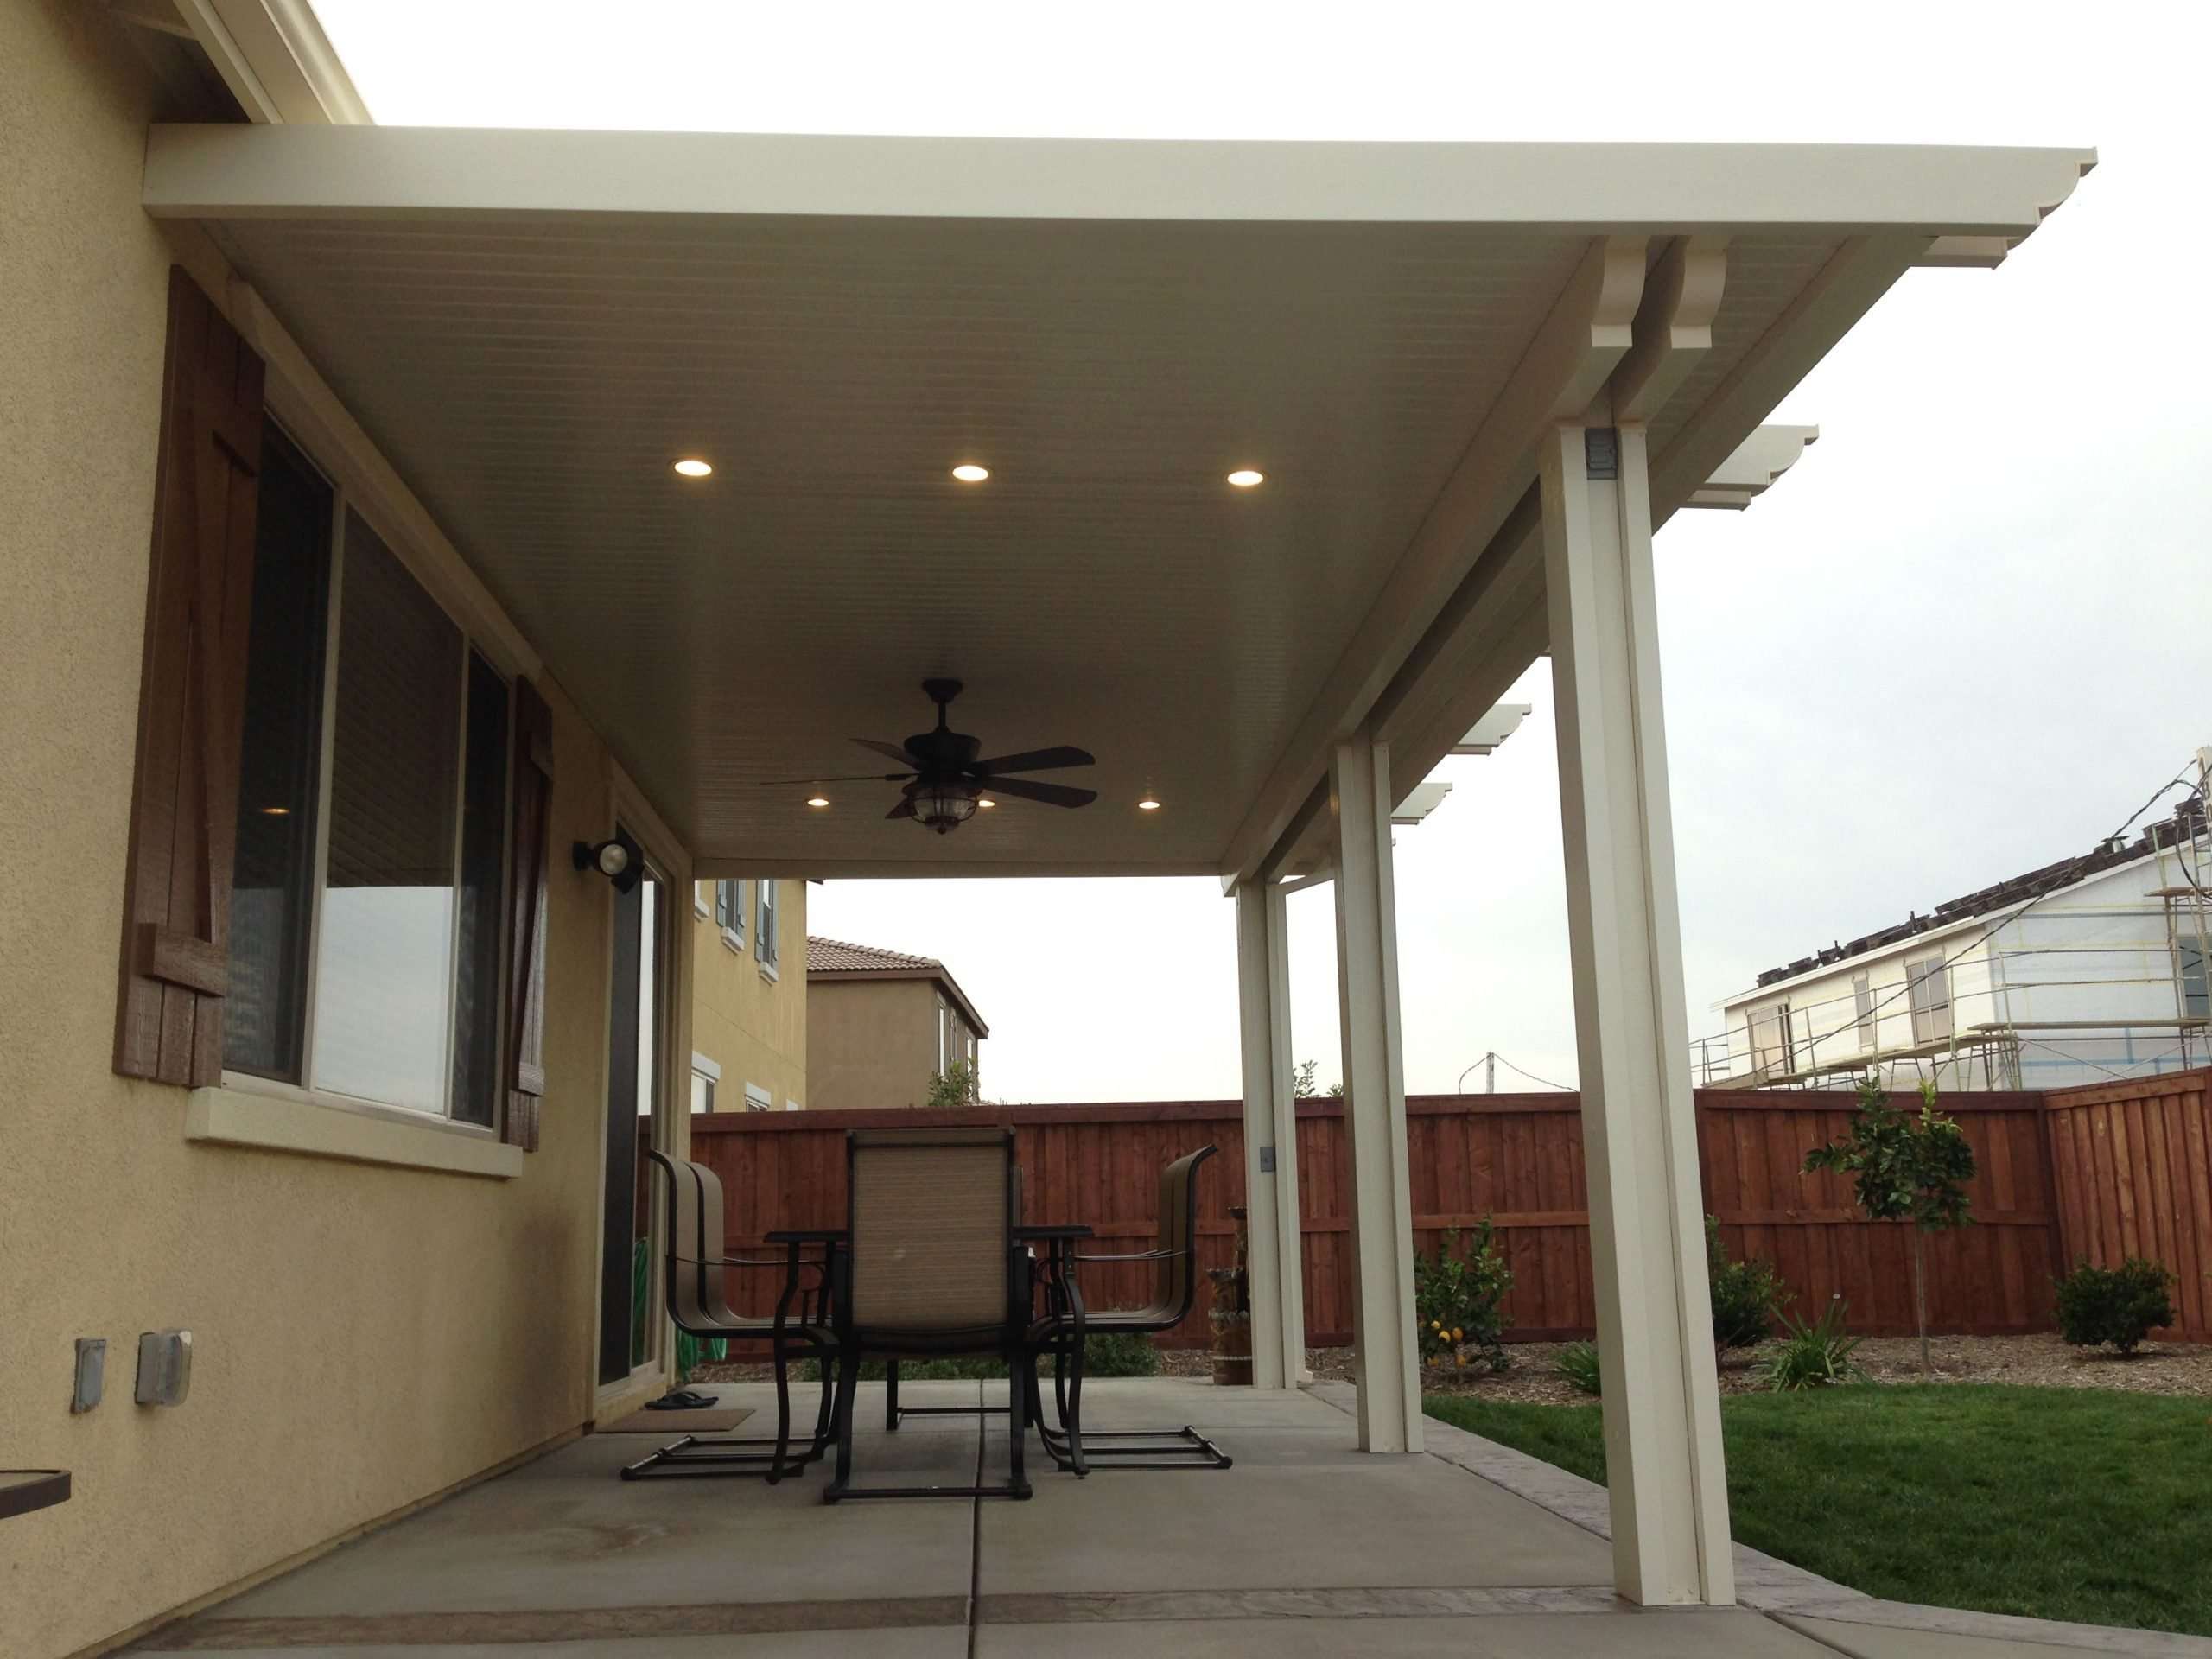 Alumawood patio cover with fan and two lightstrips (canned ...